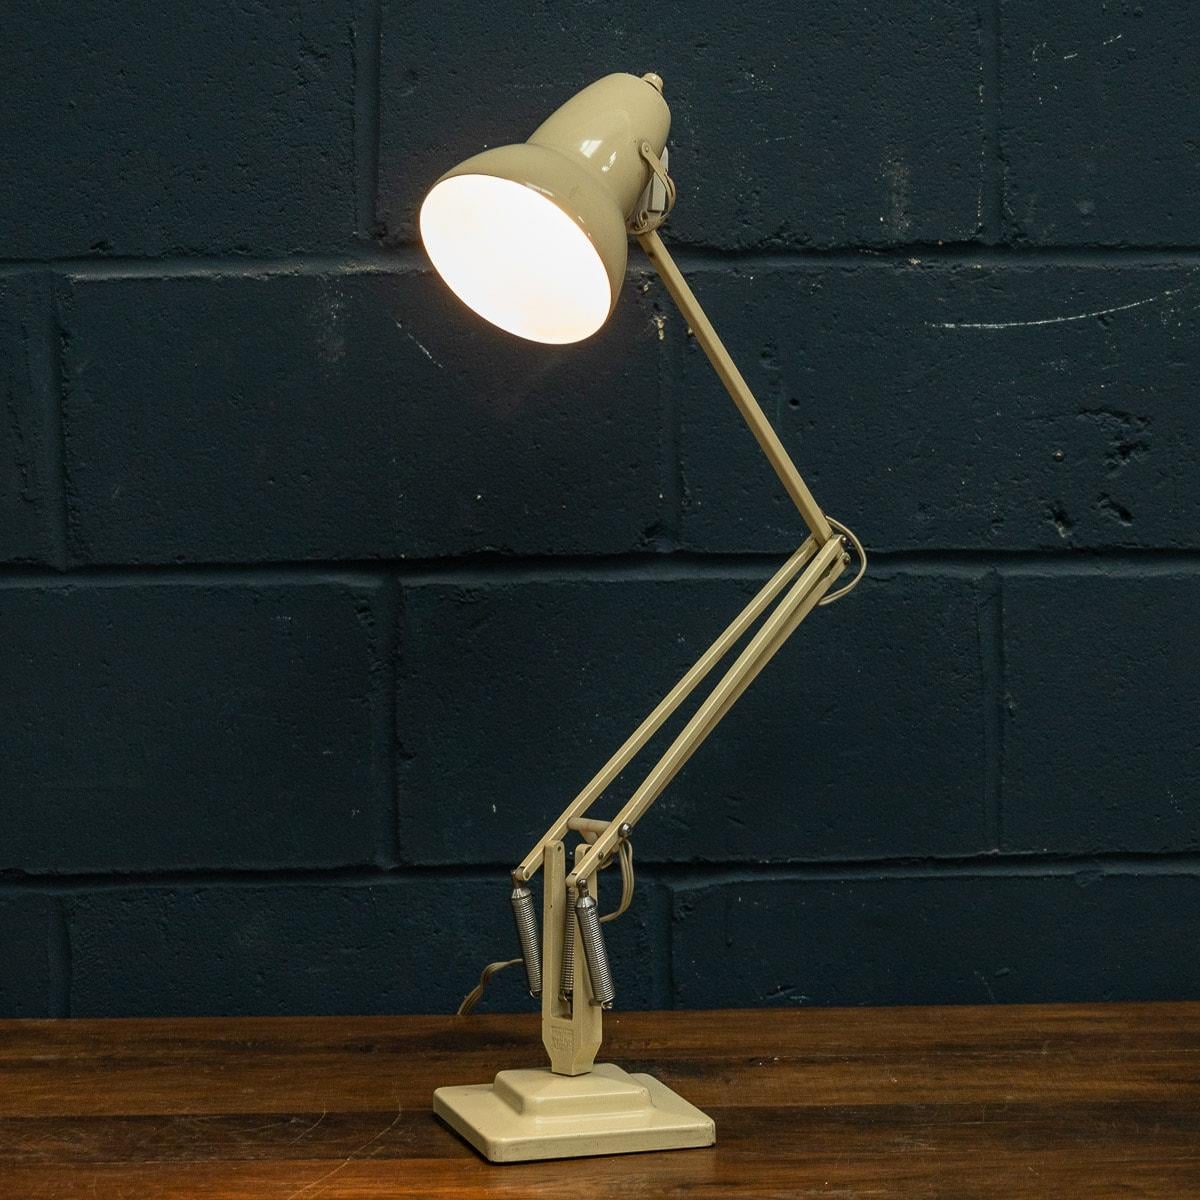 British Stunning Two-Step Herbert Terry Anglepoise Lamp, Model 1227, England, circa 1970 For Sale